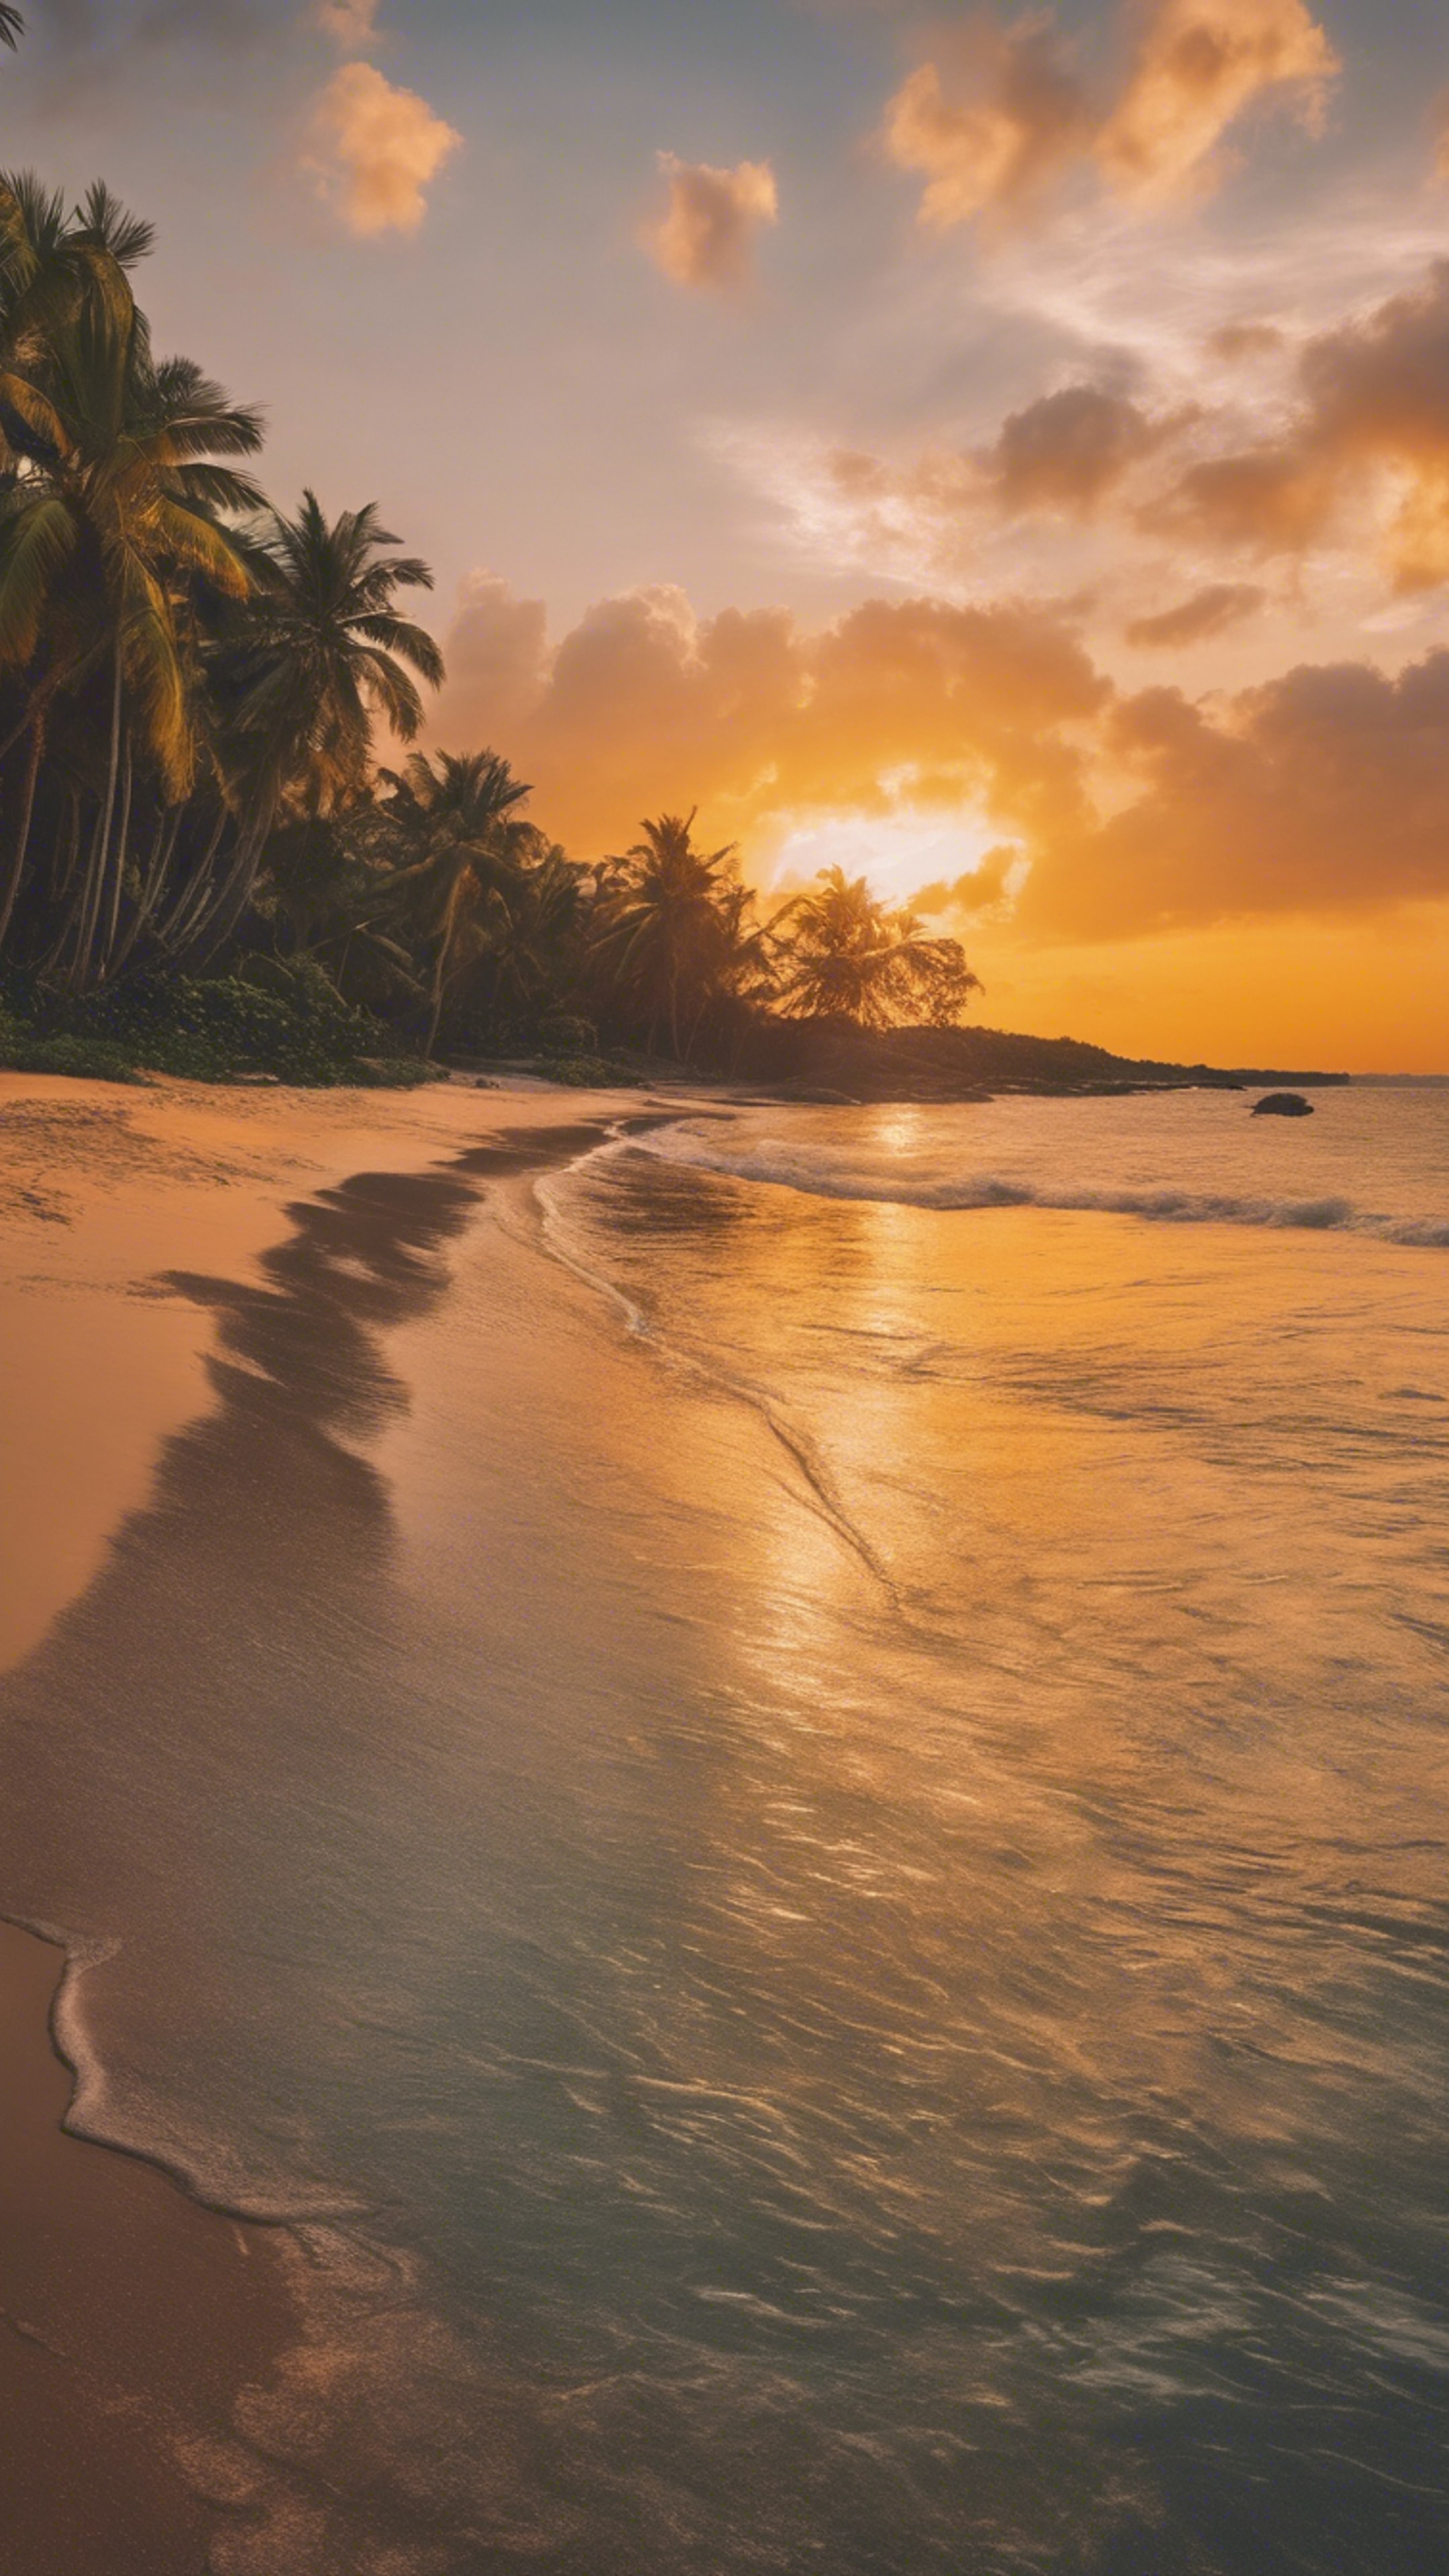 A tropical beach at sunset with hues of orange and yellow gently reflecting on the clear water. Tapet[f1cd0a05f1594f21a6bf]